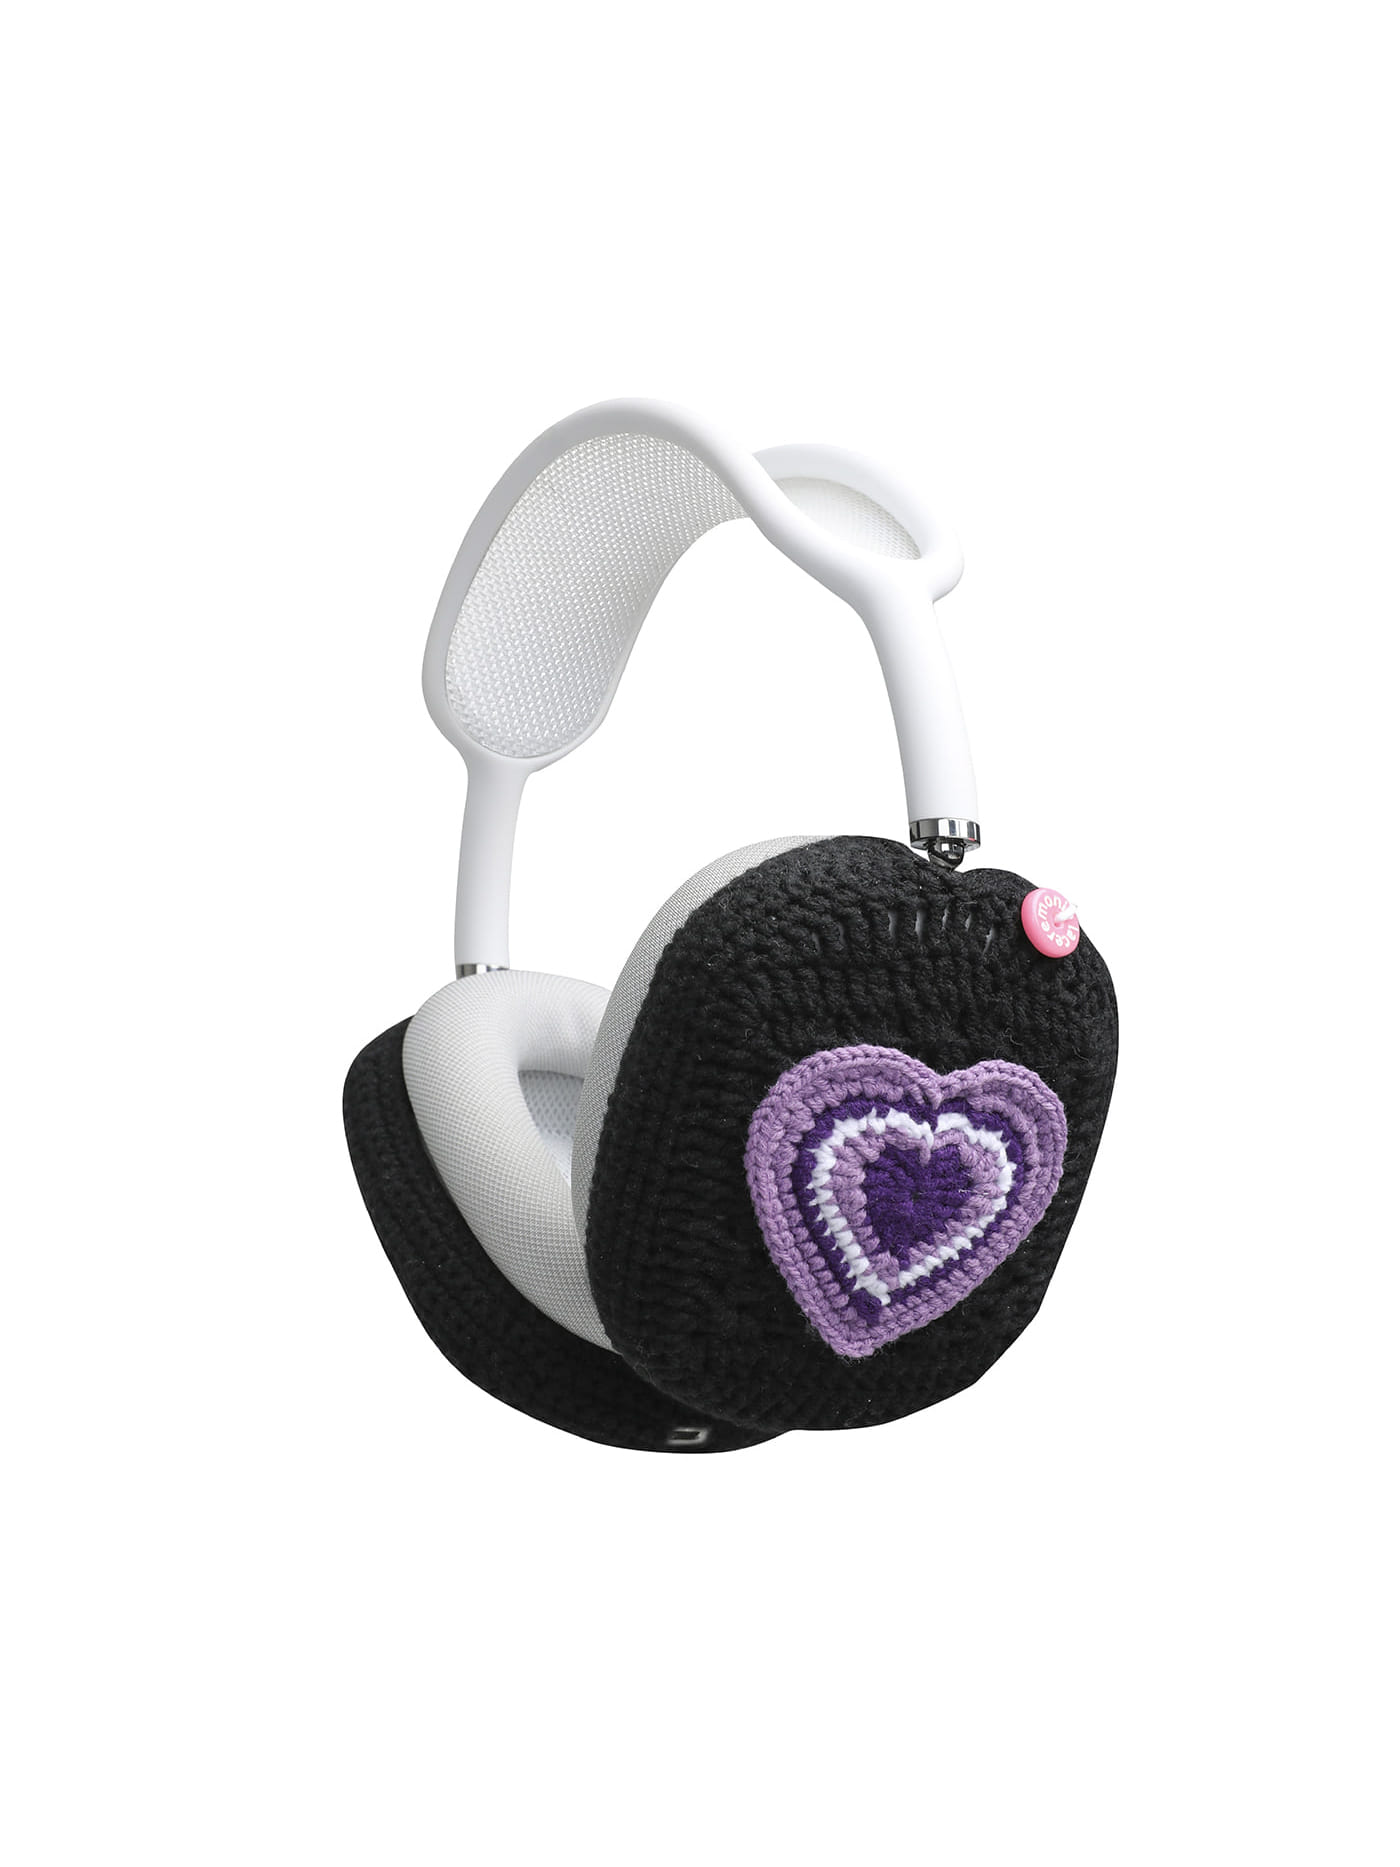 Airpods Max Case - Heart (Black)